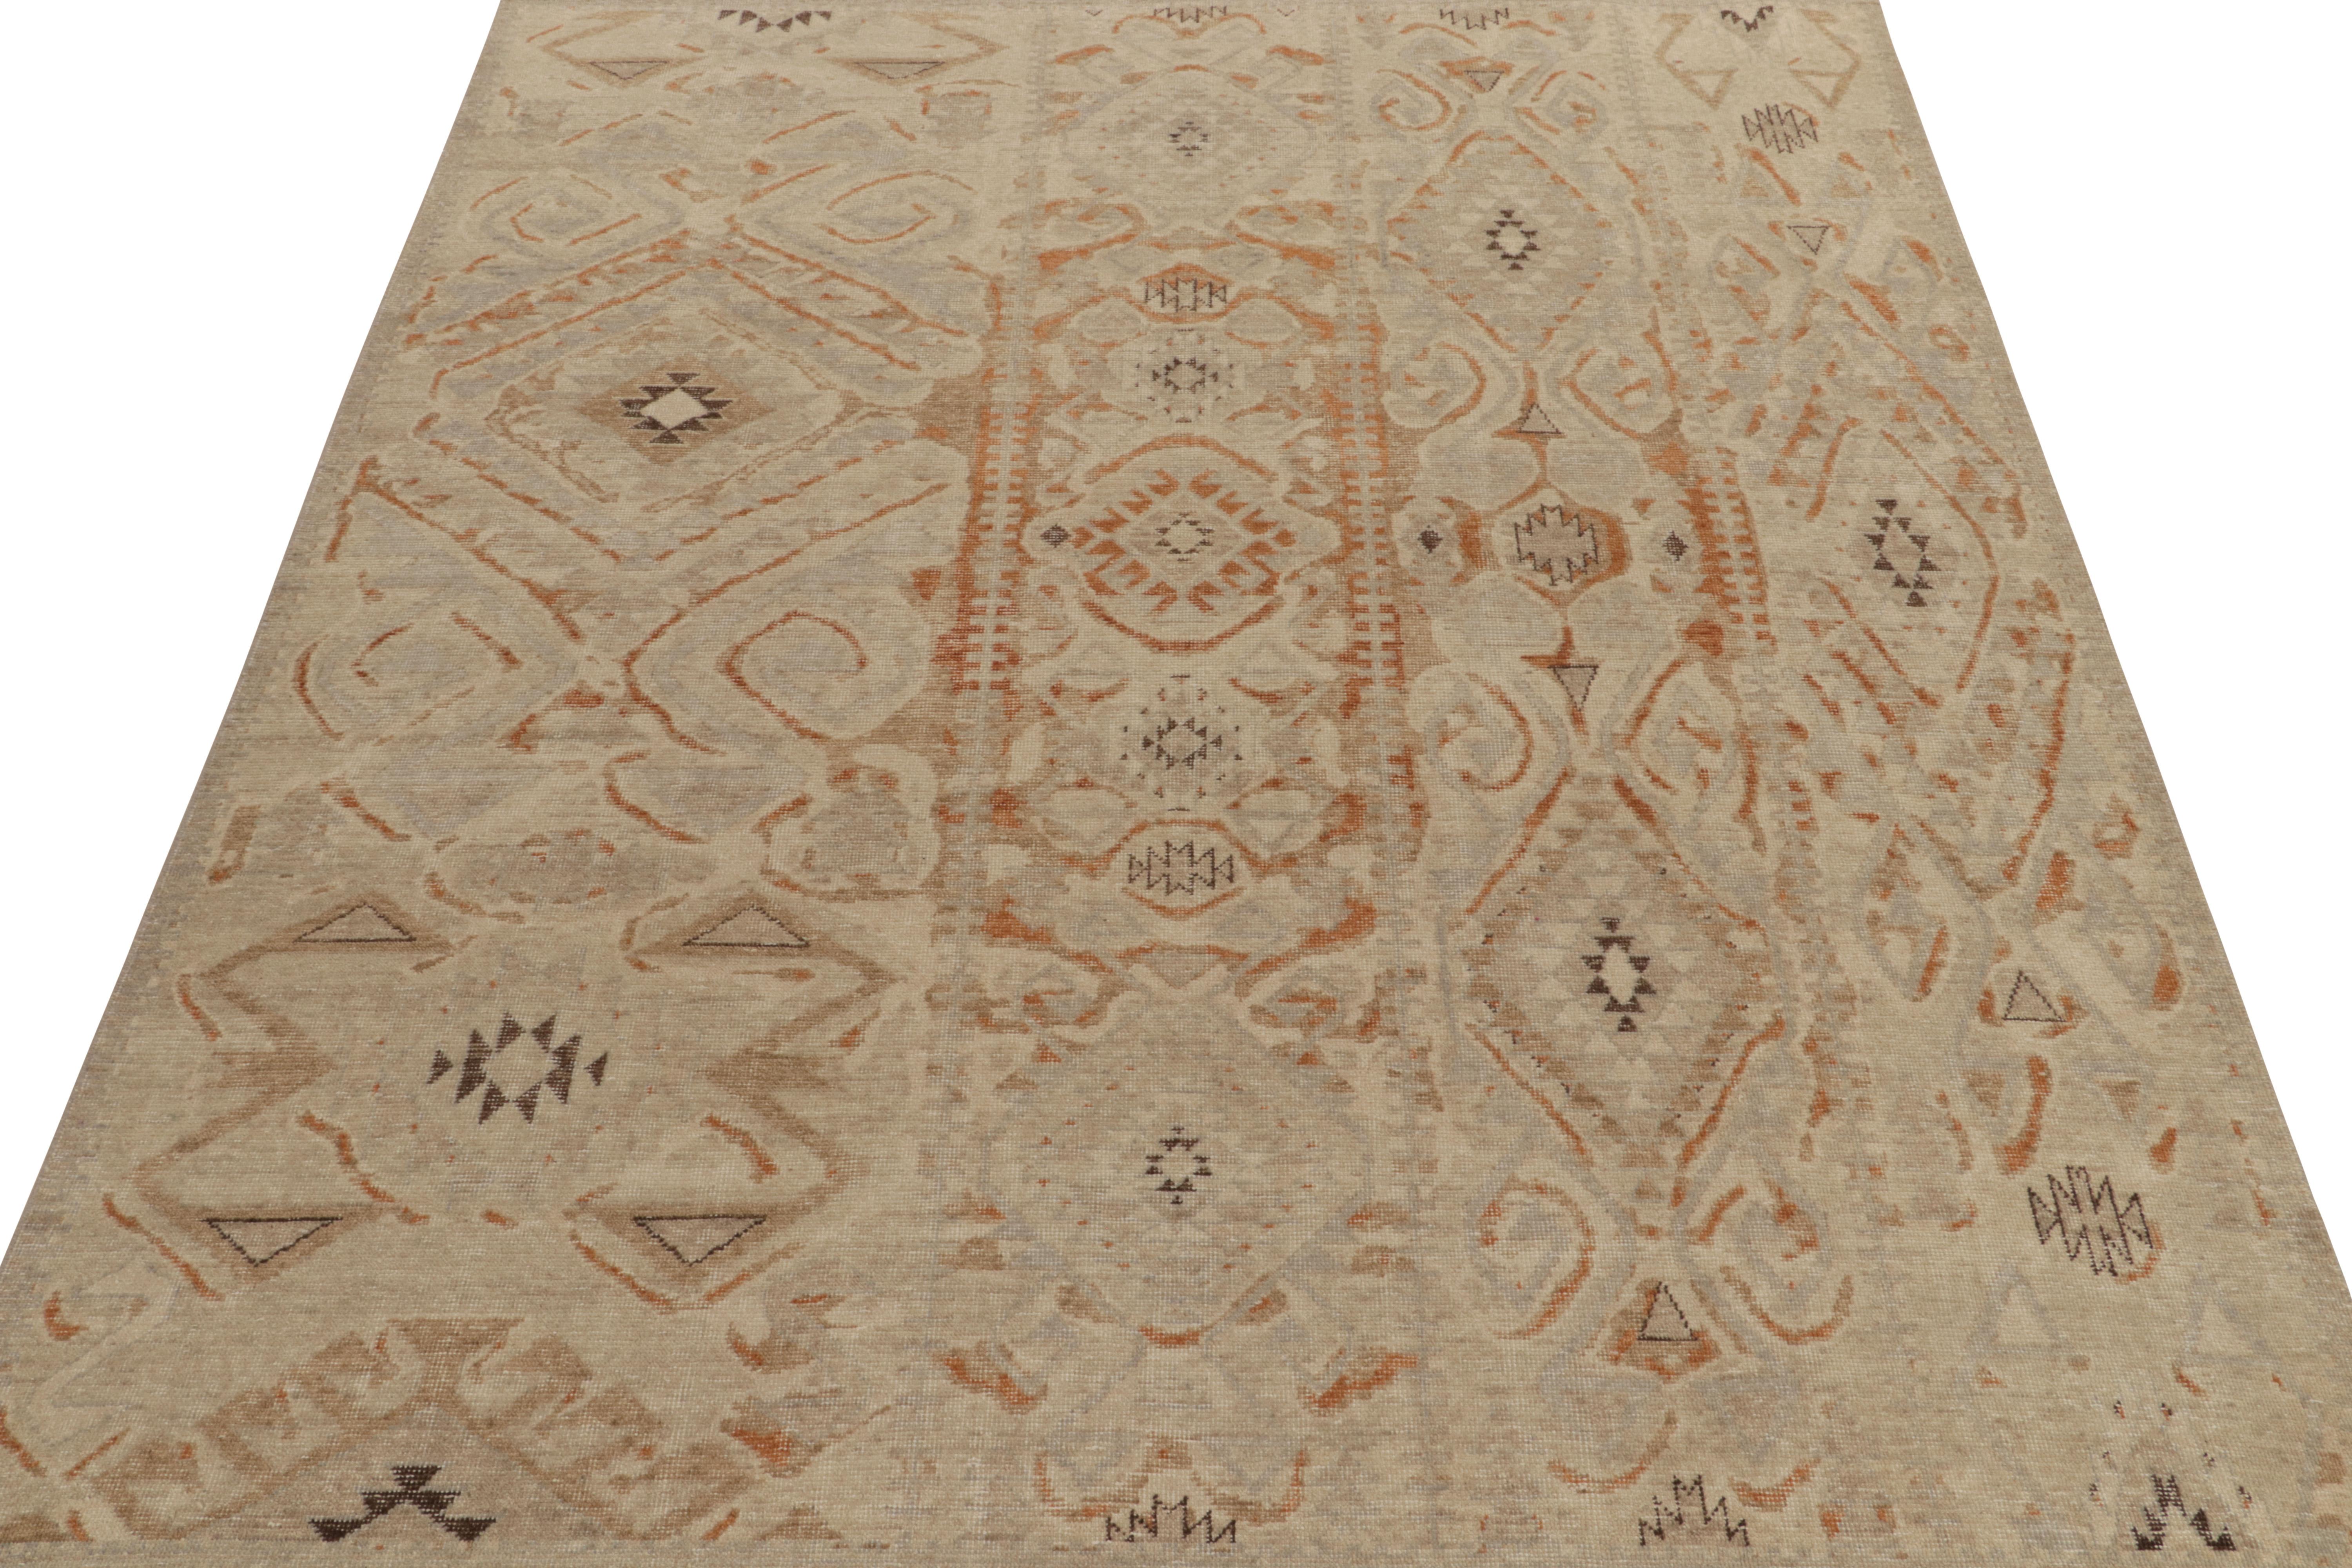 Indian Rug & Kilim’s Distressed Style Rug in Beige-Brown, Blue & Rust Tribal Patterns For Sale